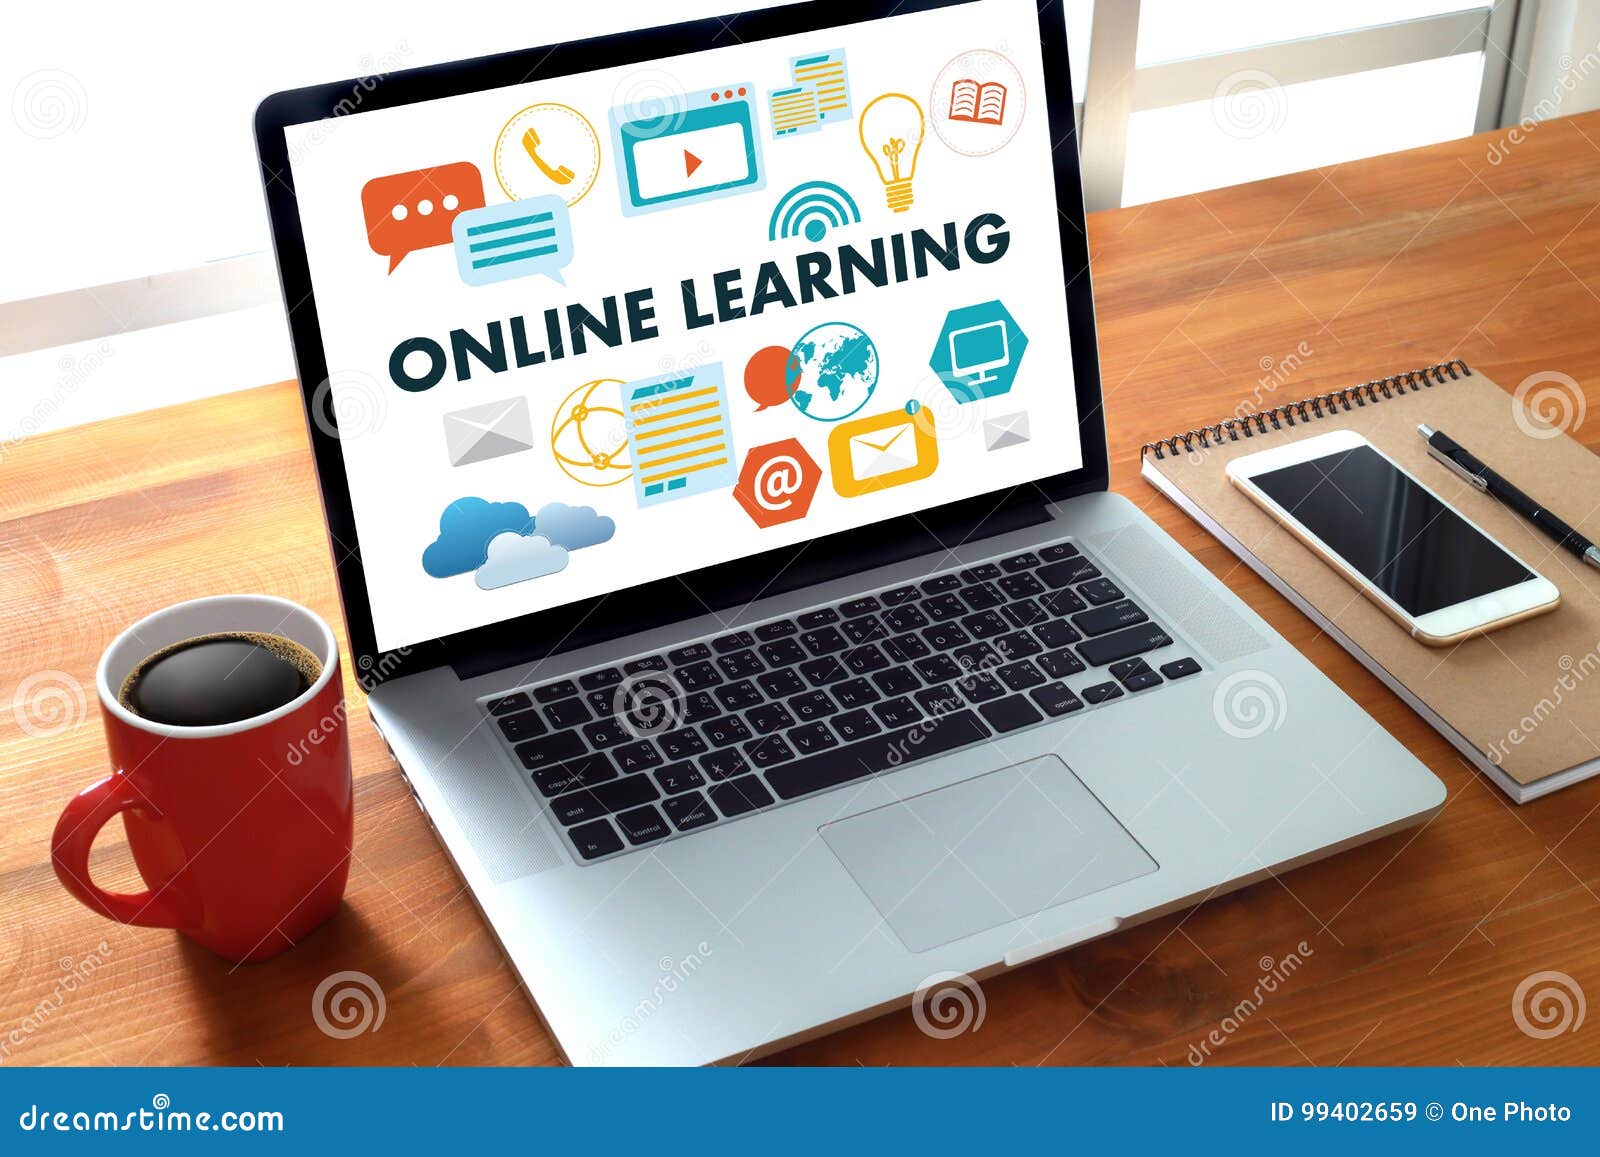 ONLINE LEARNING Connectivity Technology Coaching Online Skills T - of drawing, laptop: 99402659